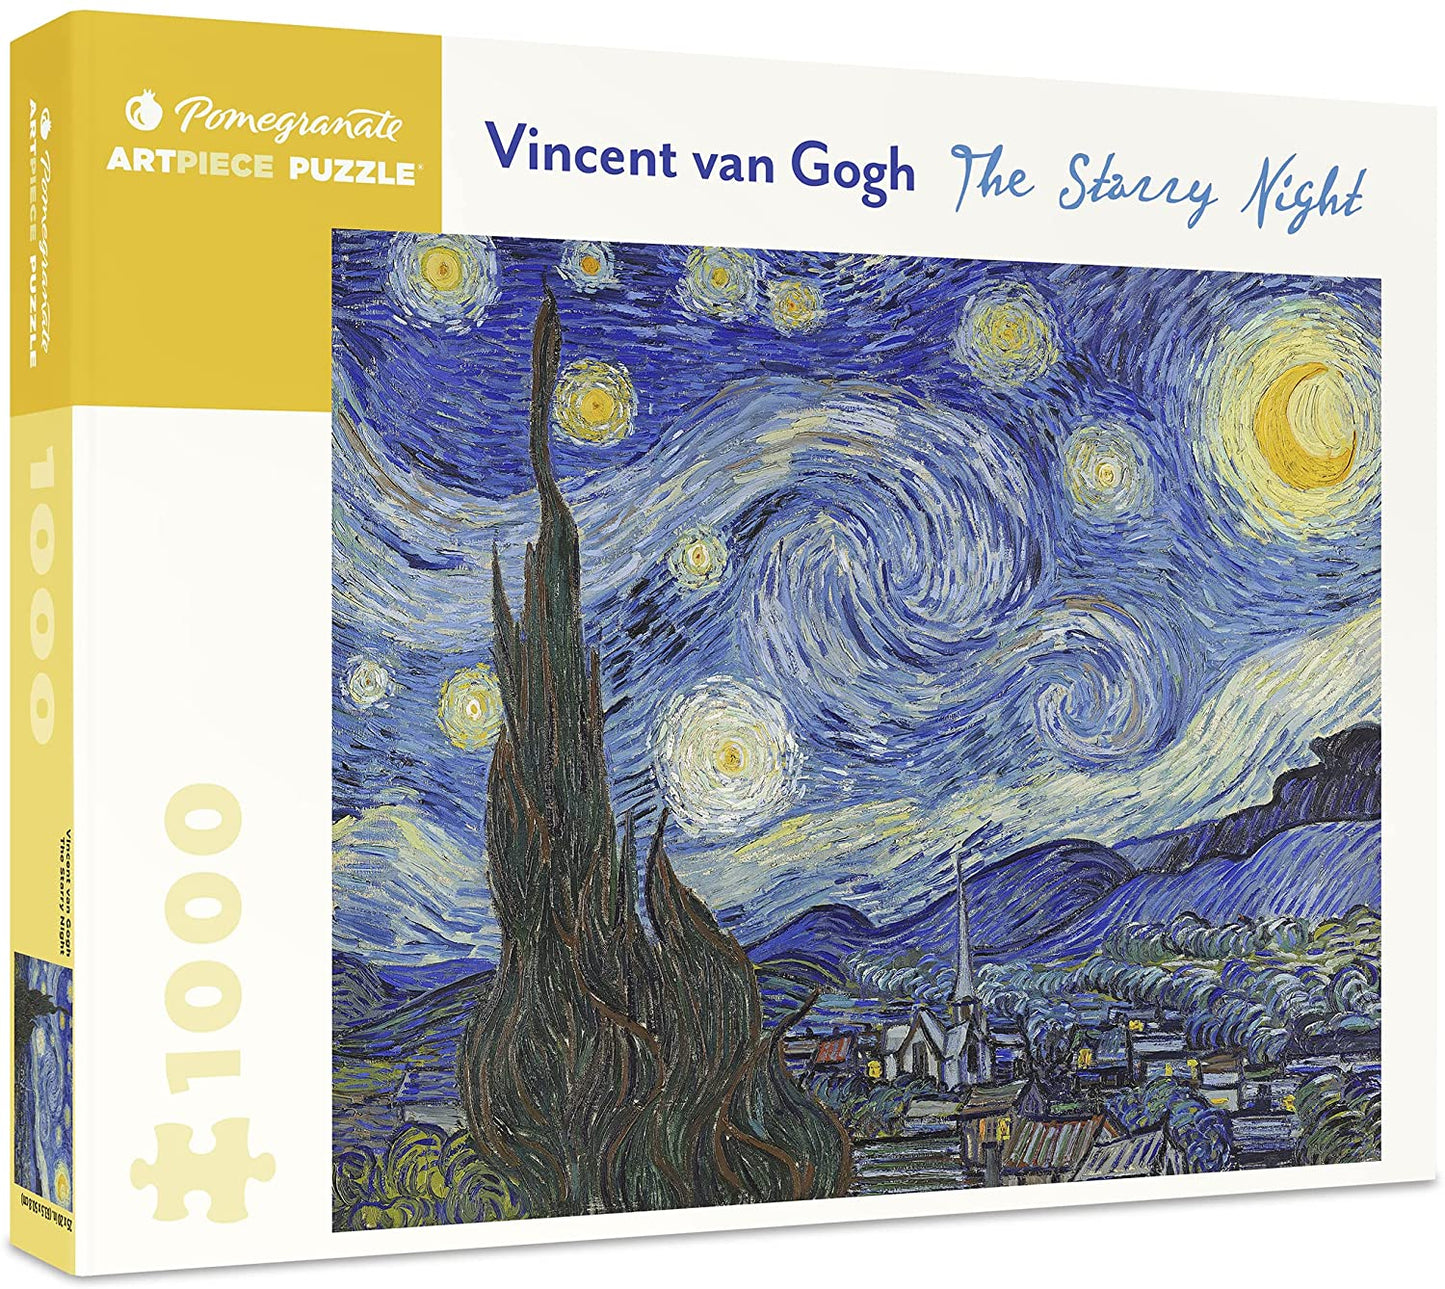 Puzzle: Vincent Van Gogh - The Starry Night 1000 Pieces